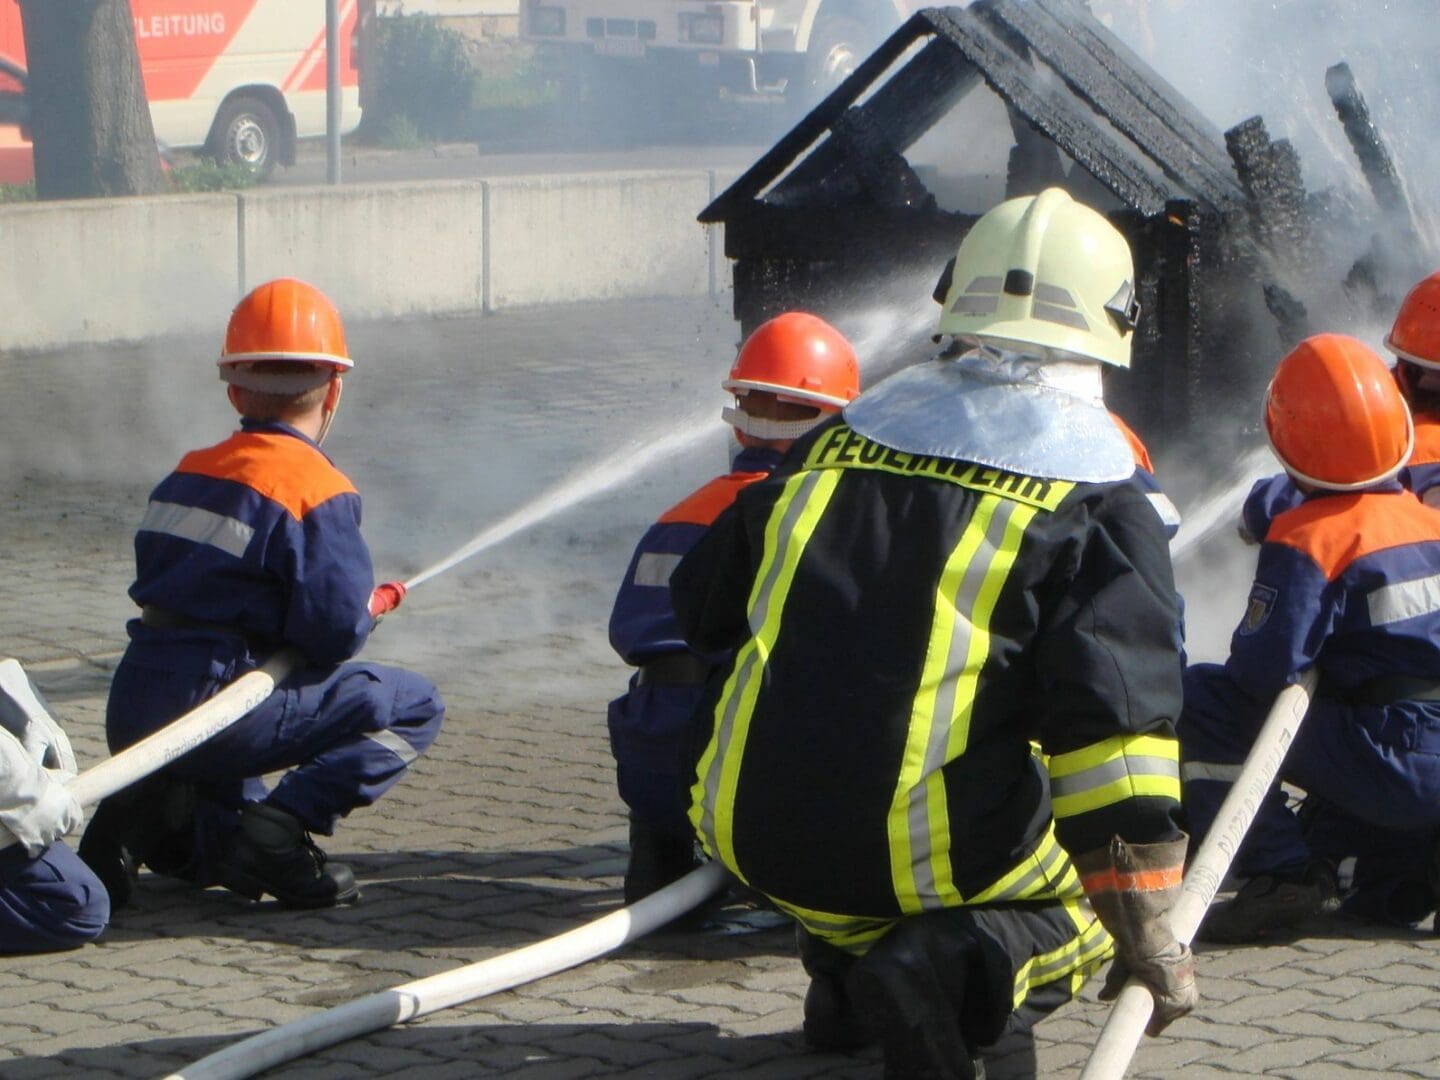 A group of people in safety gear are spraying water.